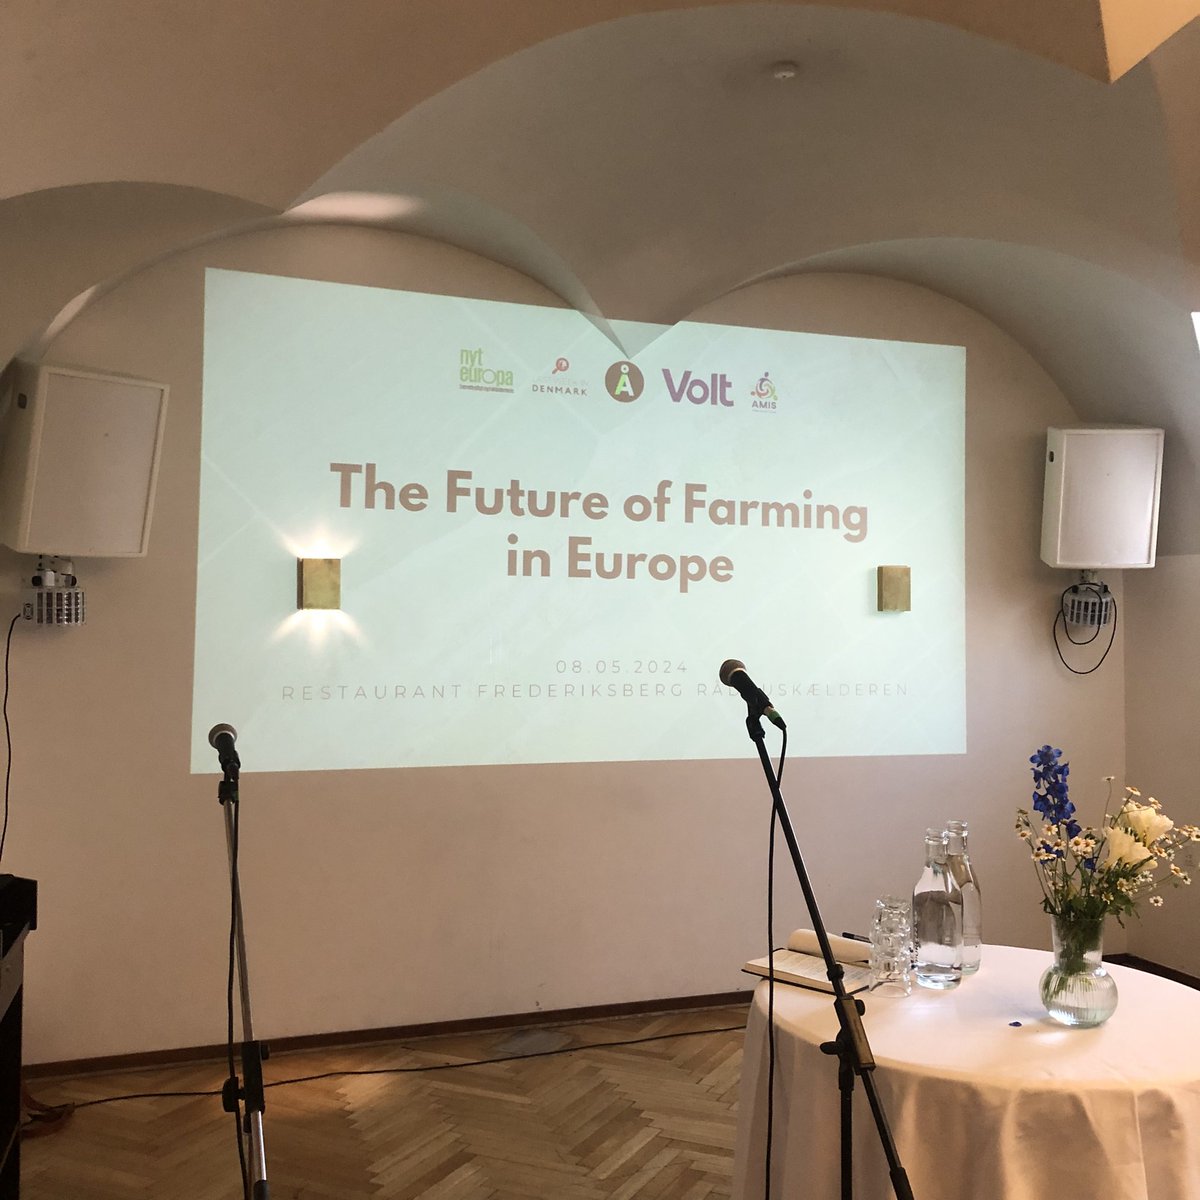 We’re ready for our 3rd English language debate at #Frederiksberg Rådhus.

Today’s subject is perhaps one of the most important ones for the #EU - our #agriculture.

Come join us, @alternativet_ , @EuropaeiskUngDK and @NytEuropa and make your voice heard 🇪🇺
#eudk #dkpol #ep2024